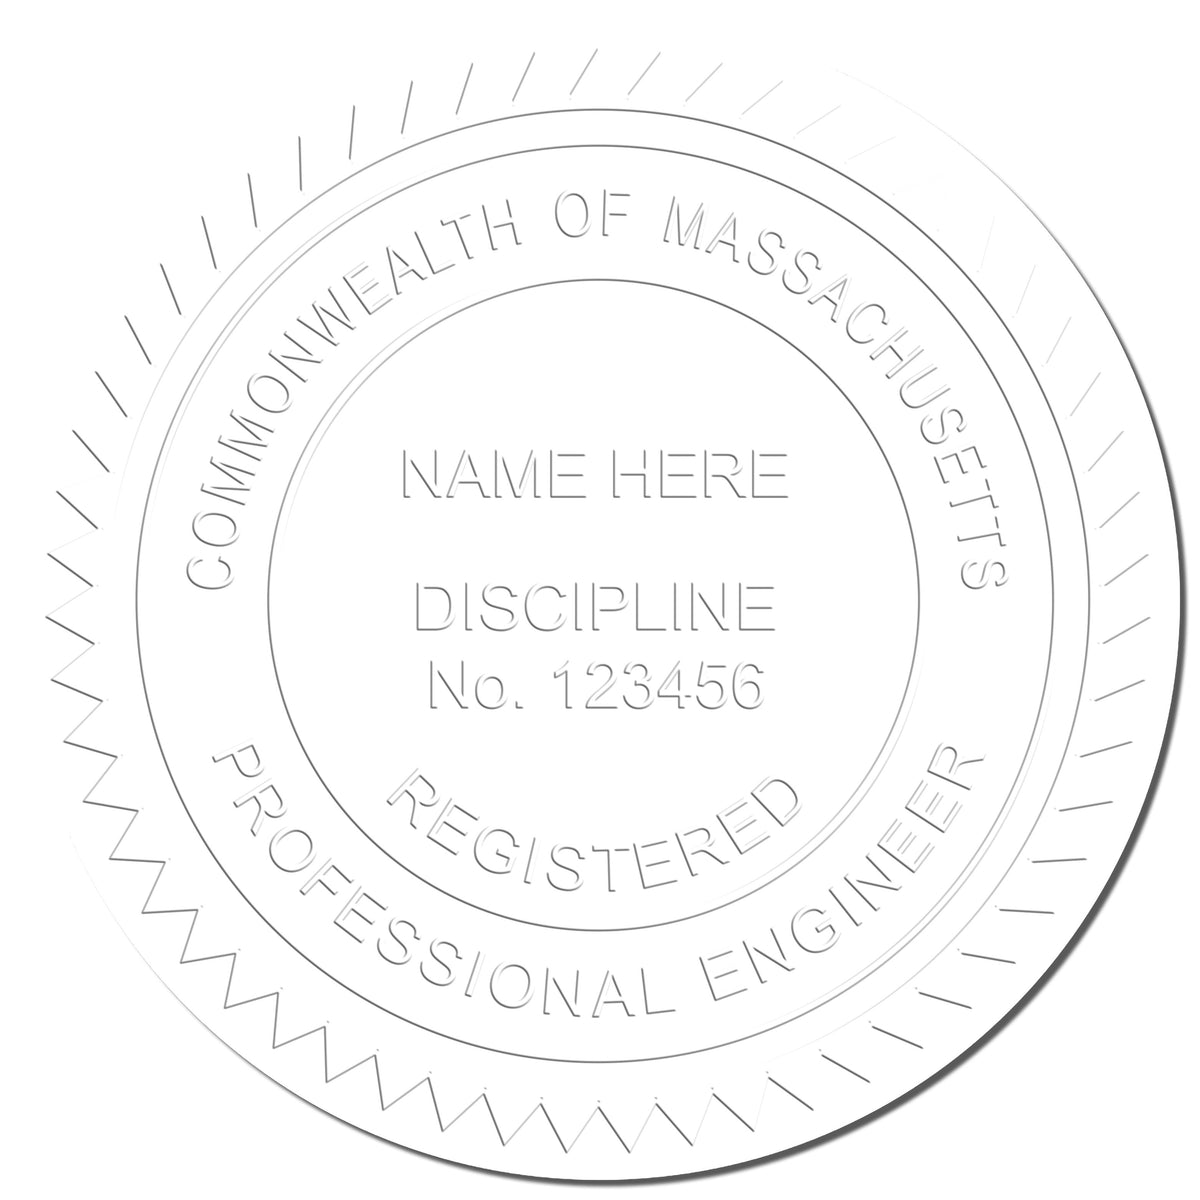 Another Example of a stamped impression of the Massachusetts Engineer Desk Seal on a piece of office paper.